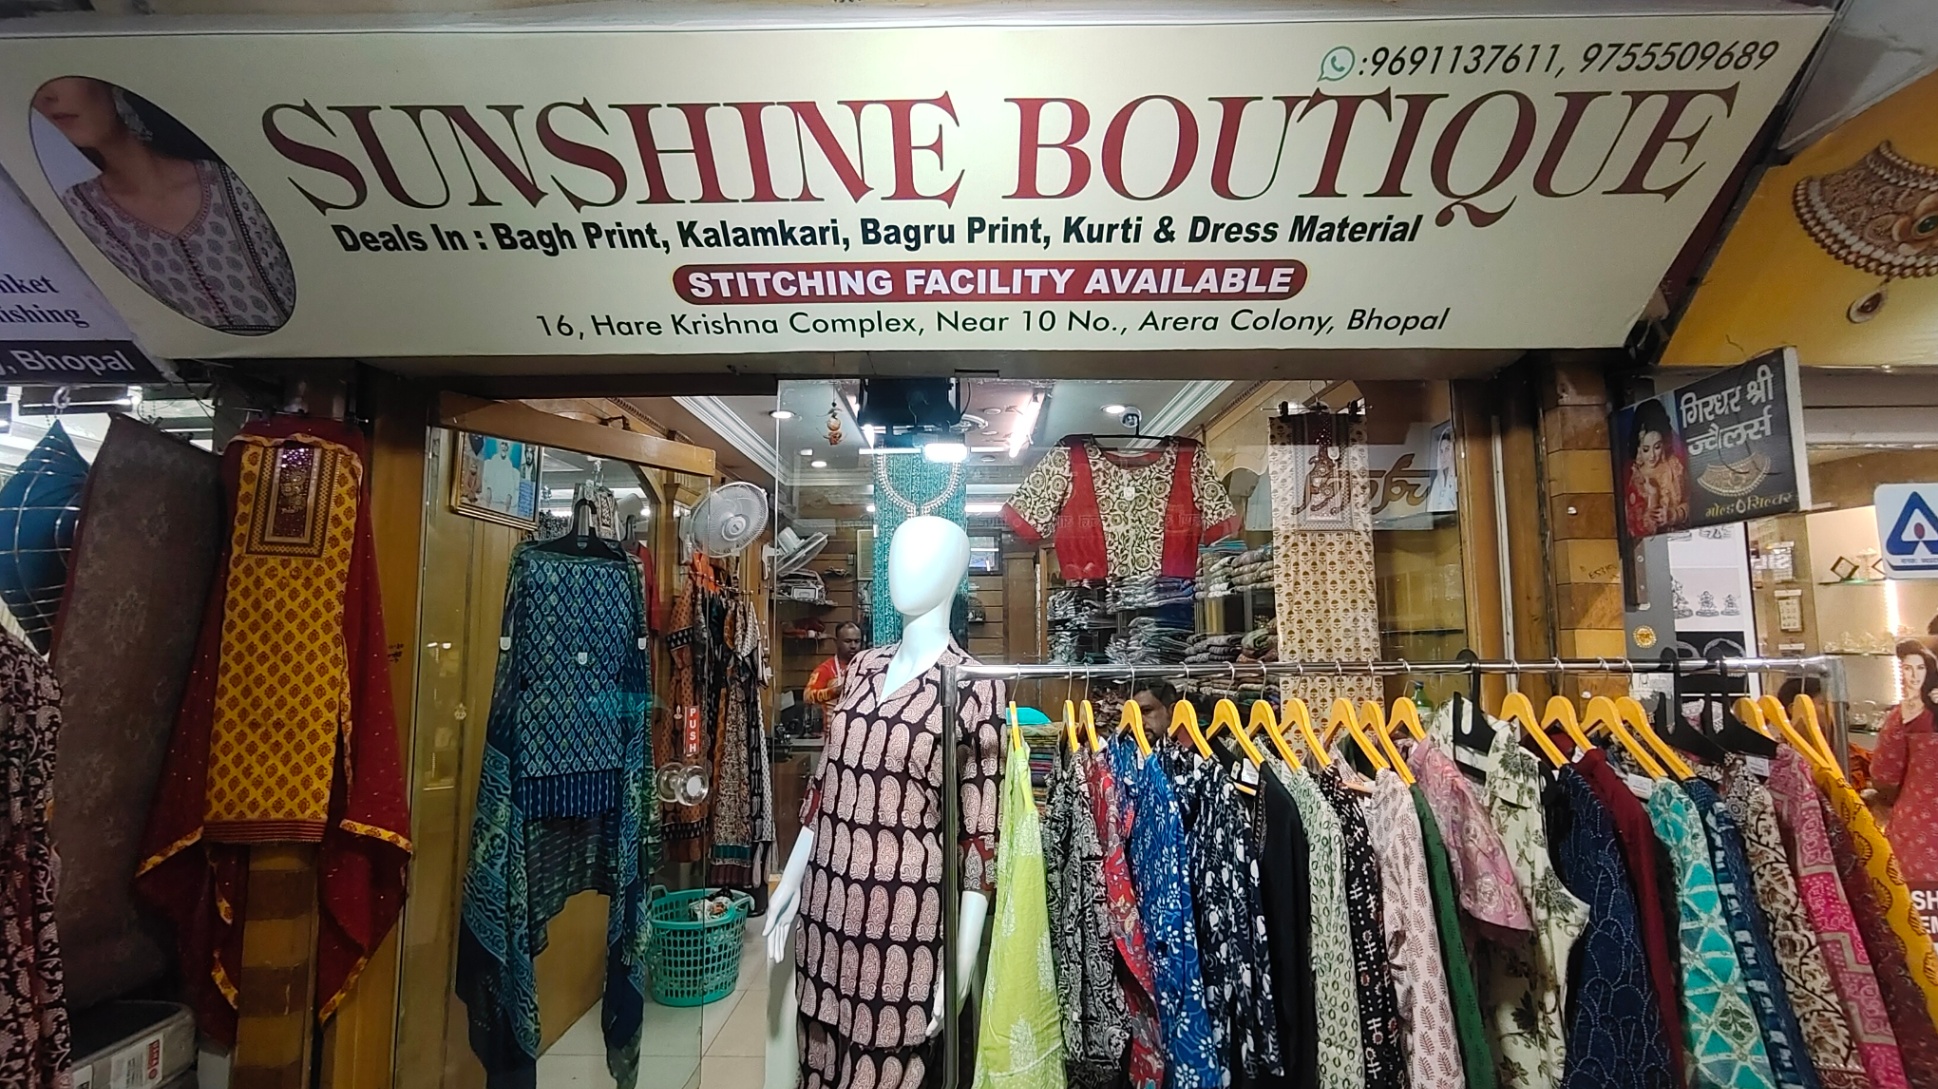 Tailoring/ Boutique; Exp: More than 15 year